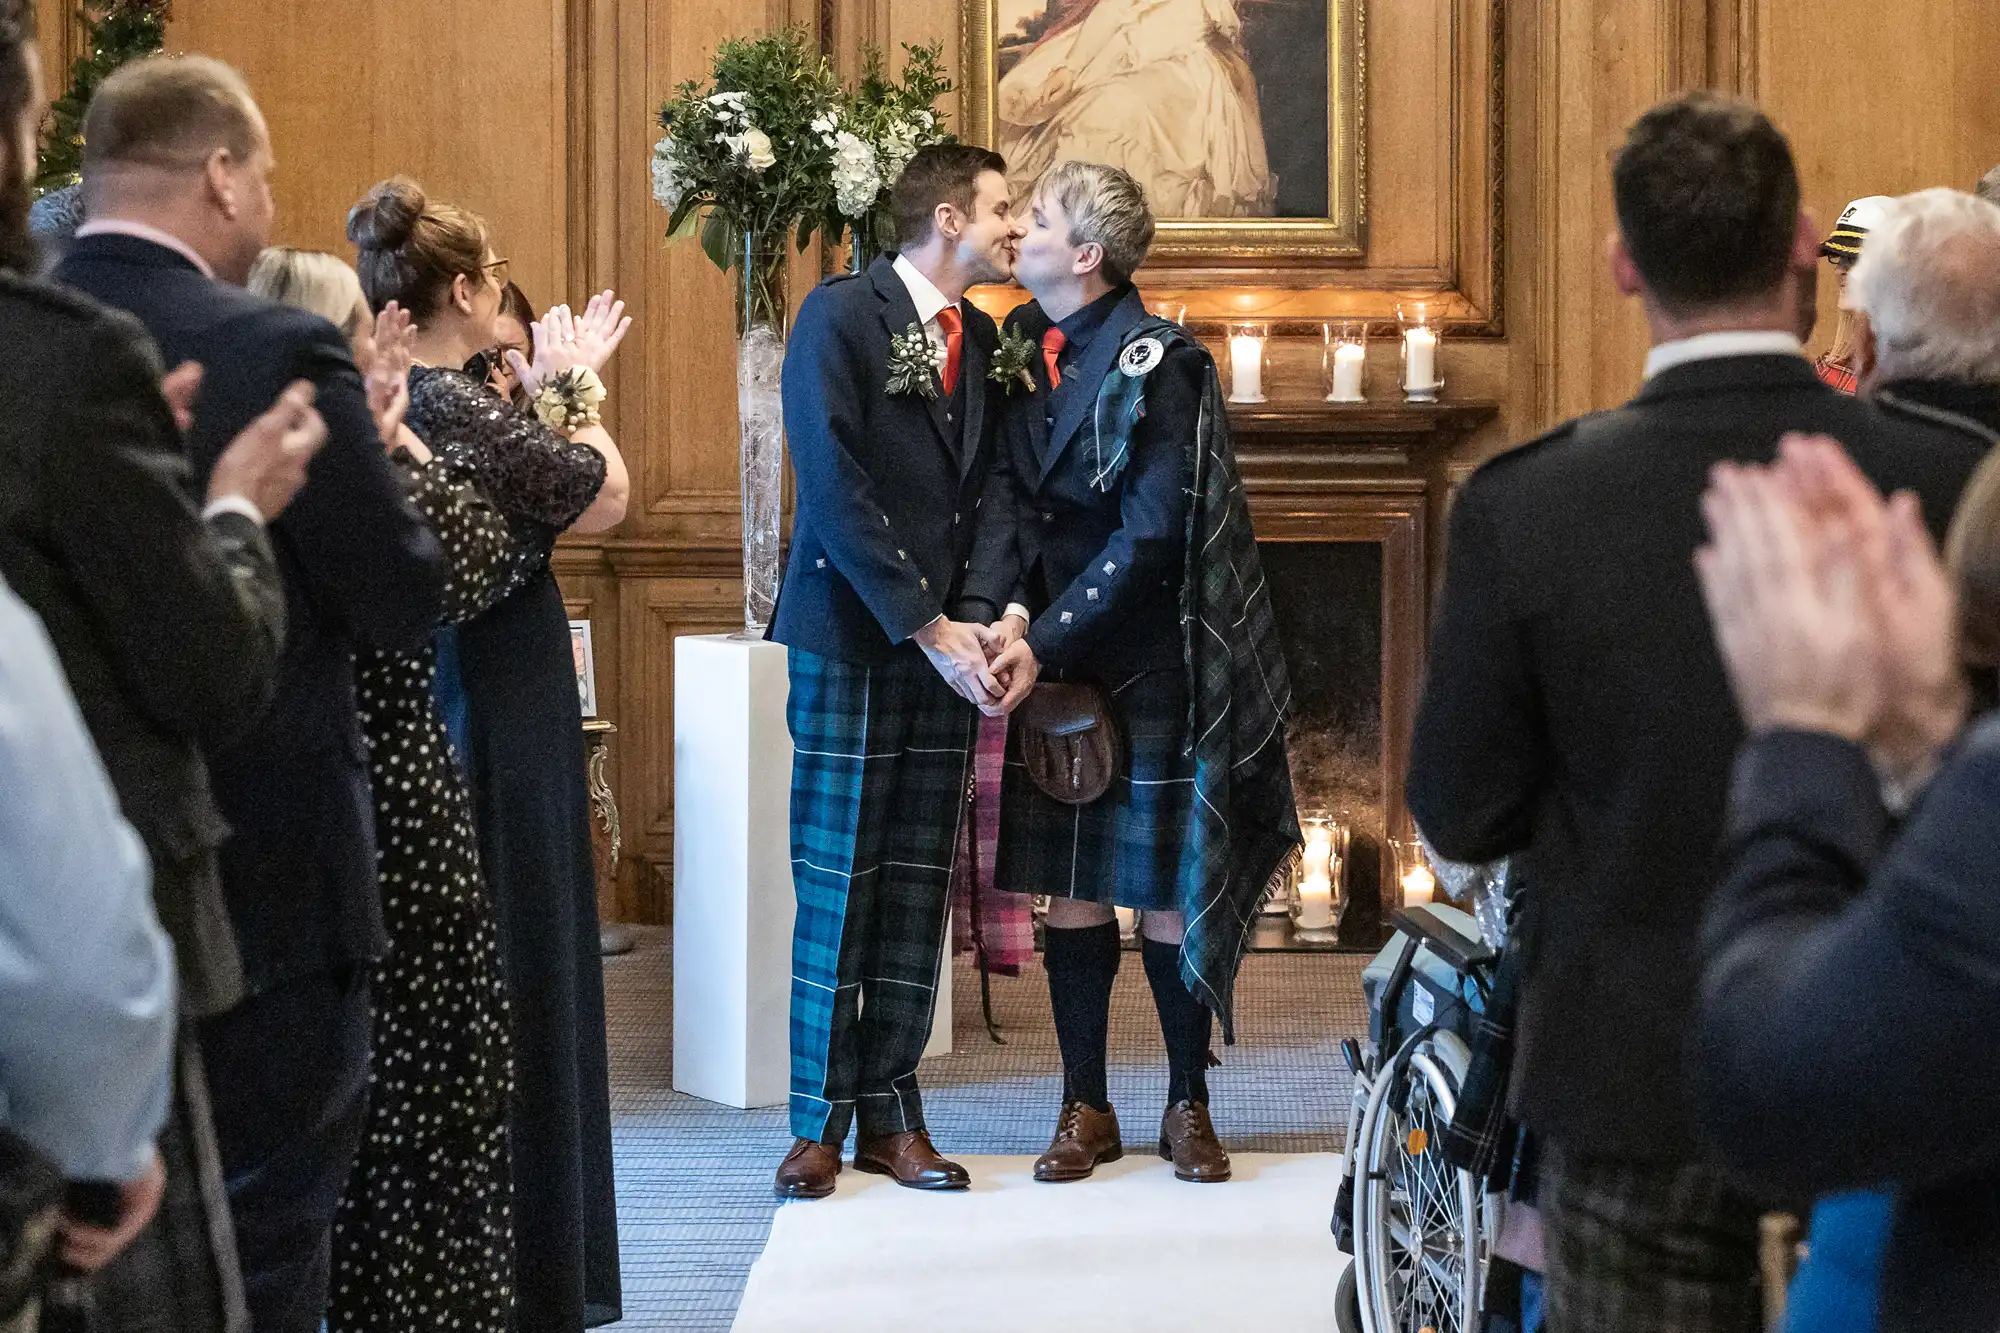 Two men in kilts kiss at the altar during their wedding ceremony, surrounded by applauding guests.